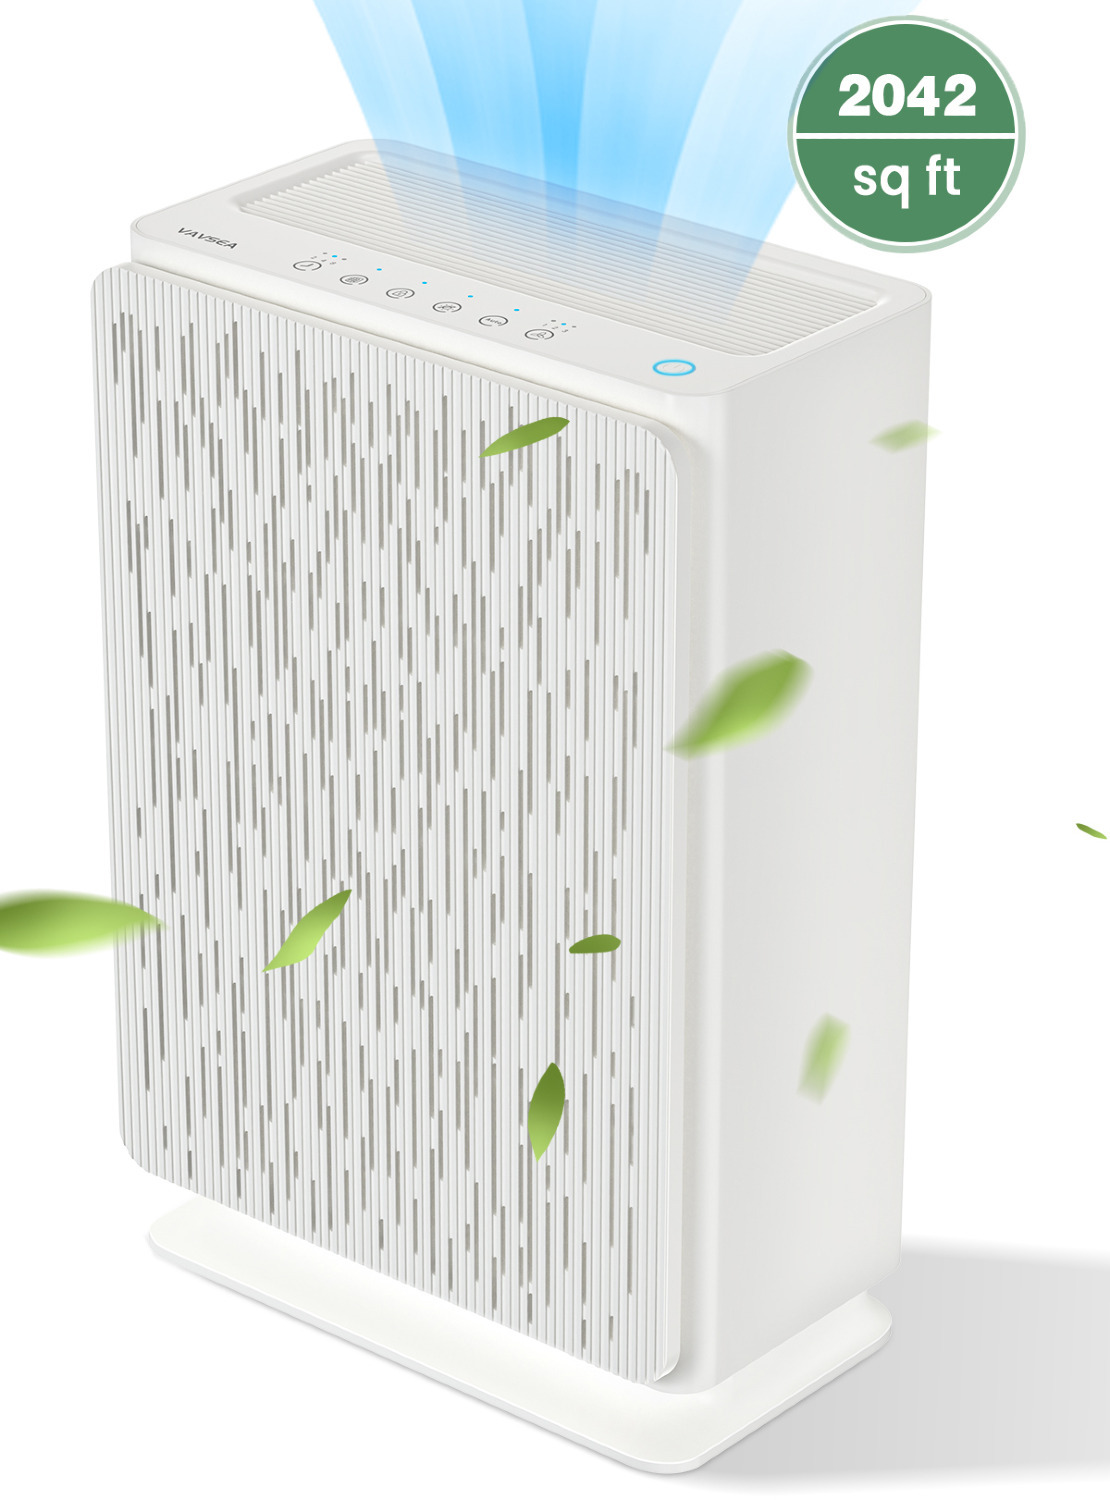 VAVSEA H13 True HEPA Air Purifier (Up to 2042Sq.Ft) $60 + Free Shipping